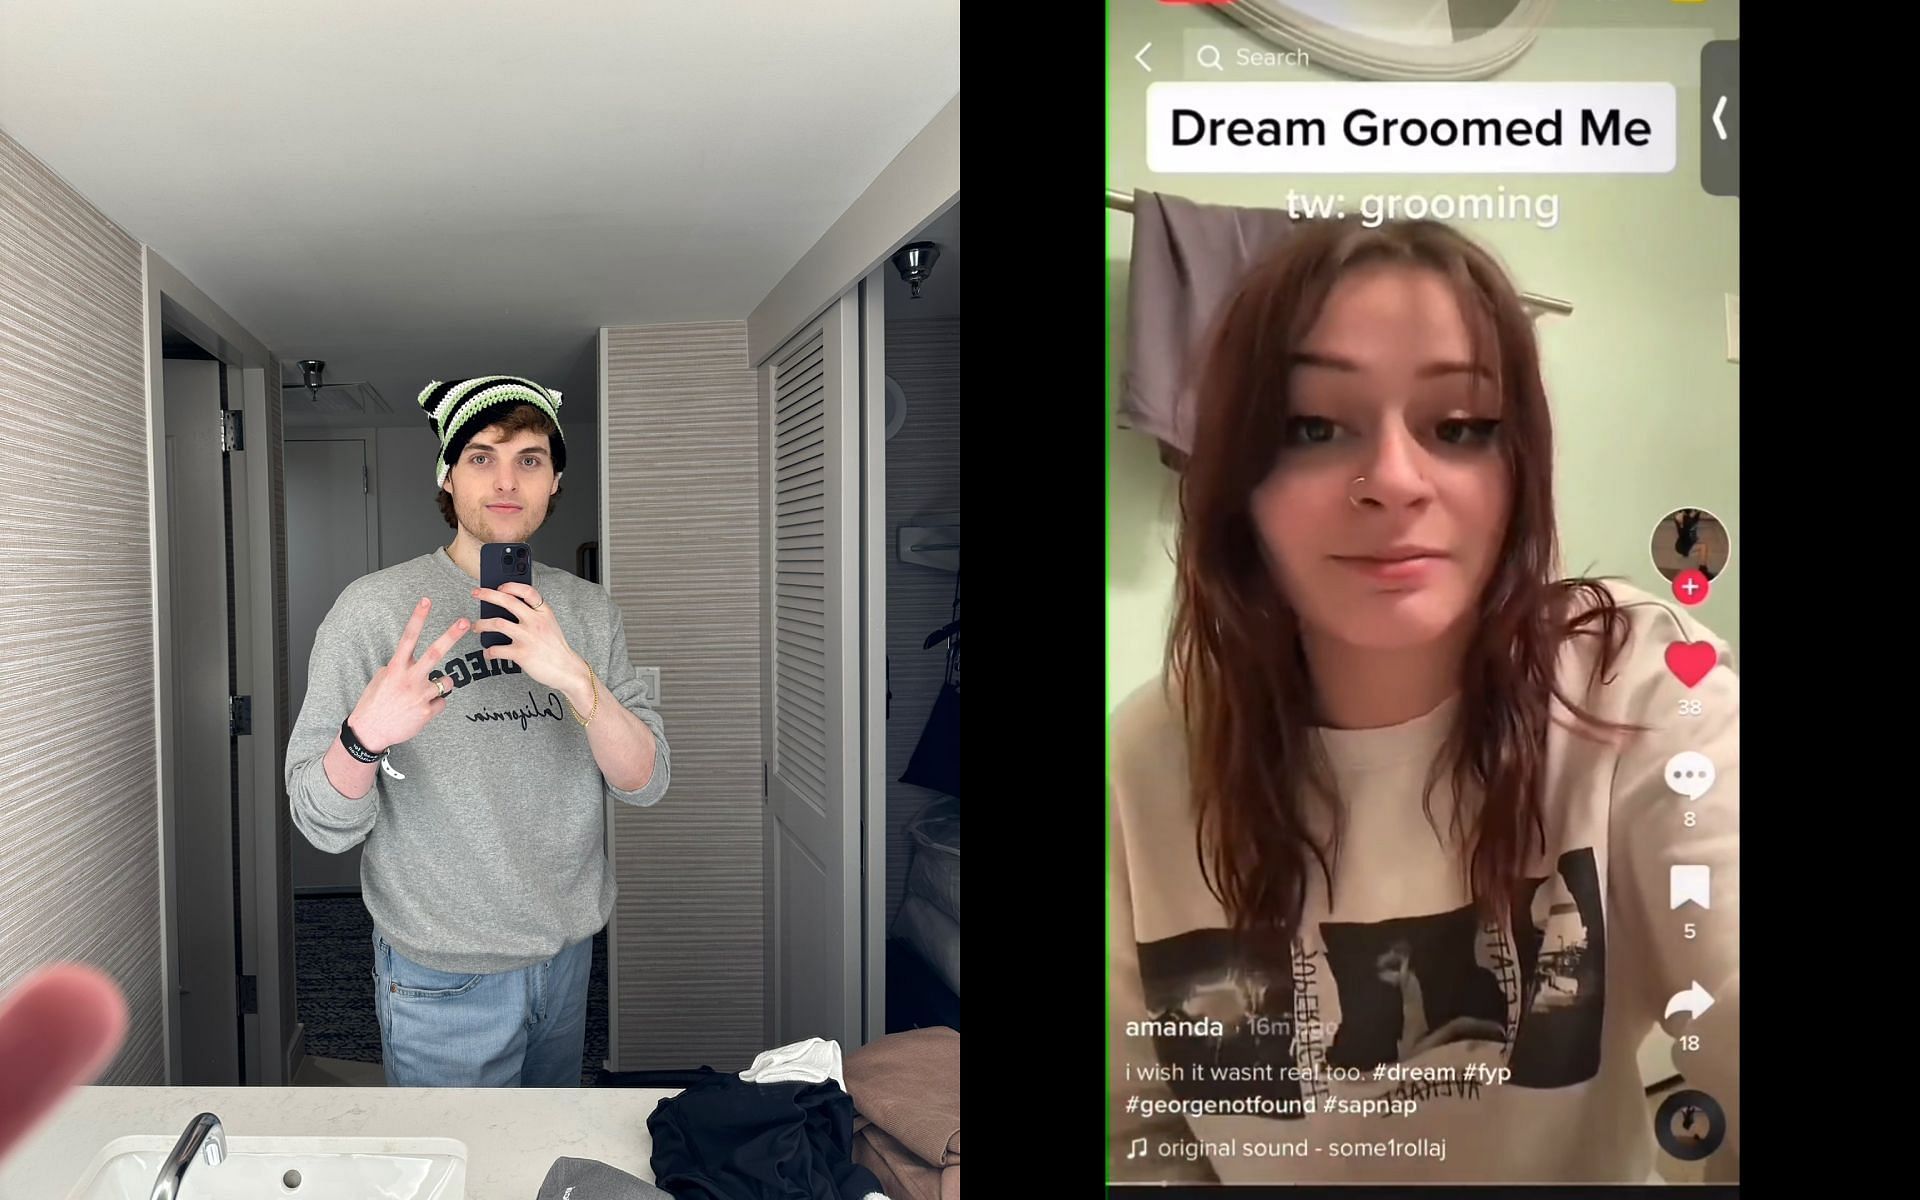 "One of the girls groomed by Dream" TikTok user reveals personal